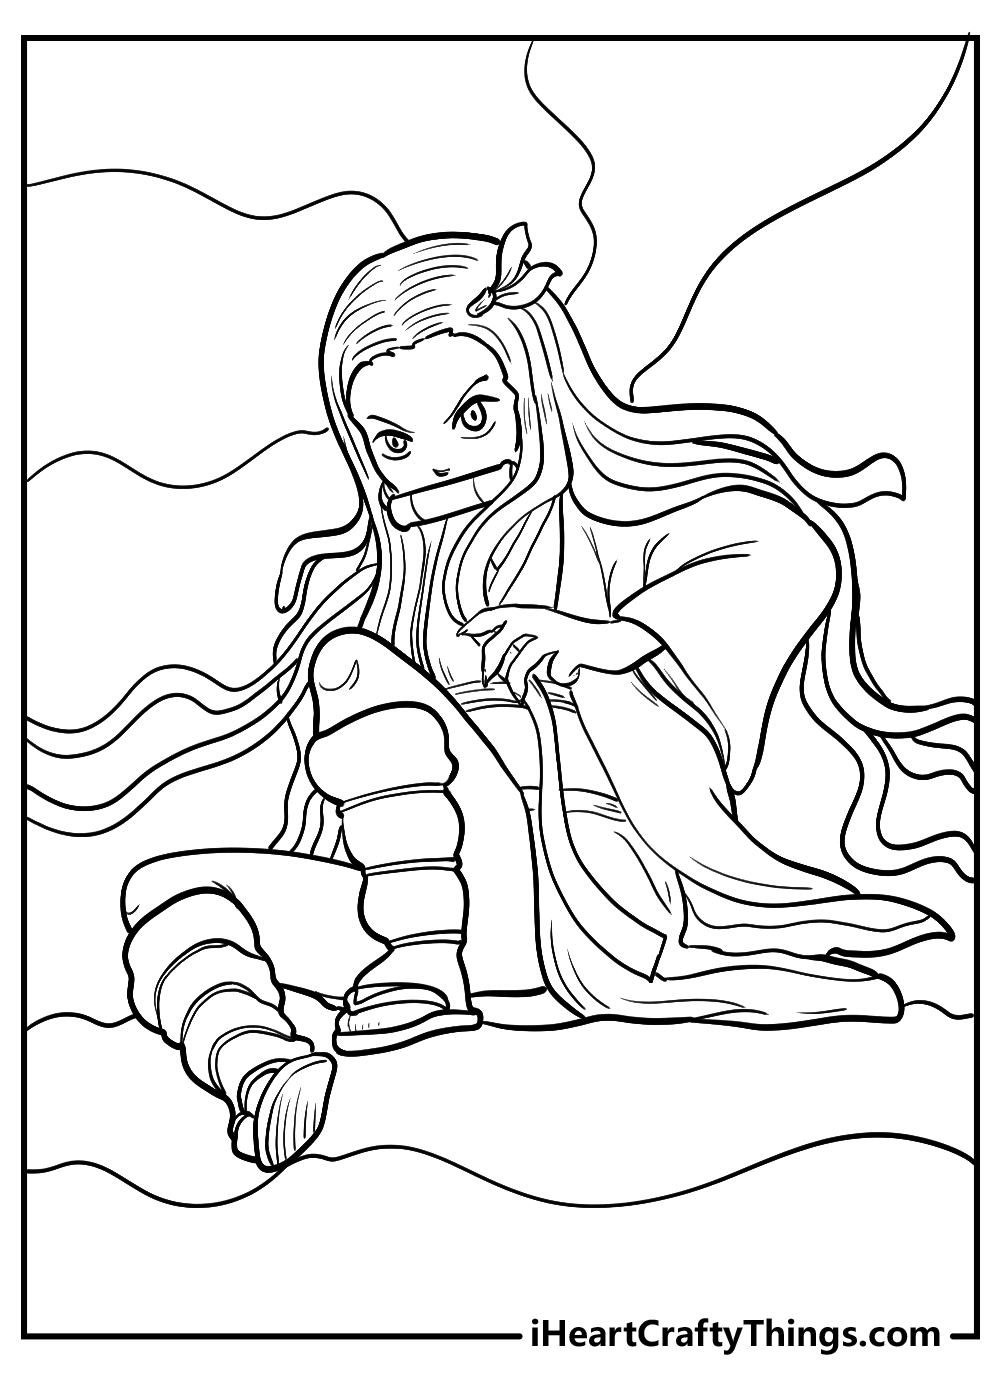 Printable nezuko coloring pages updated